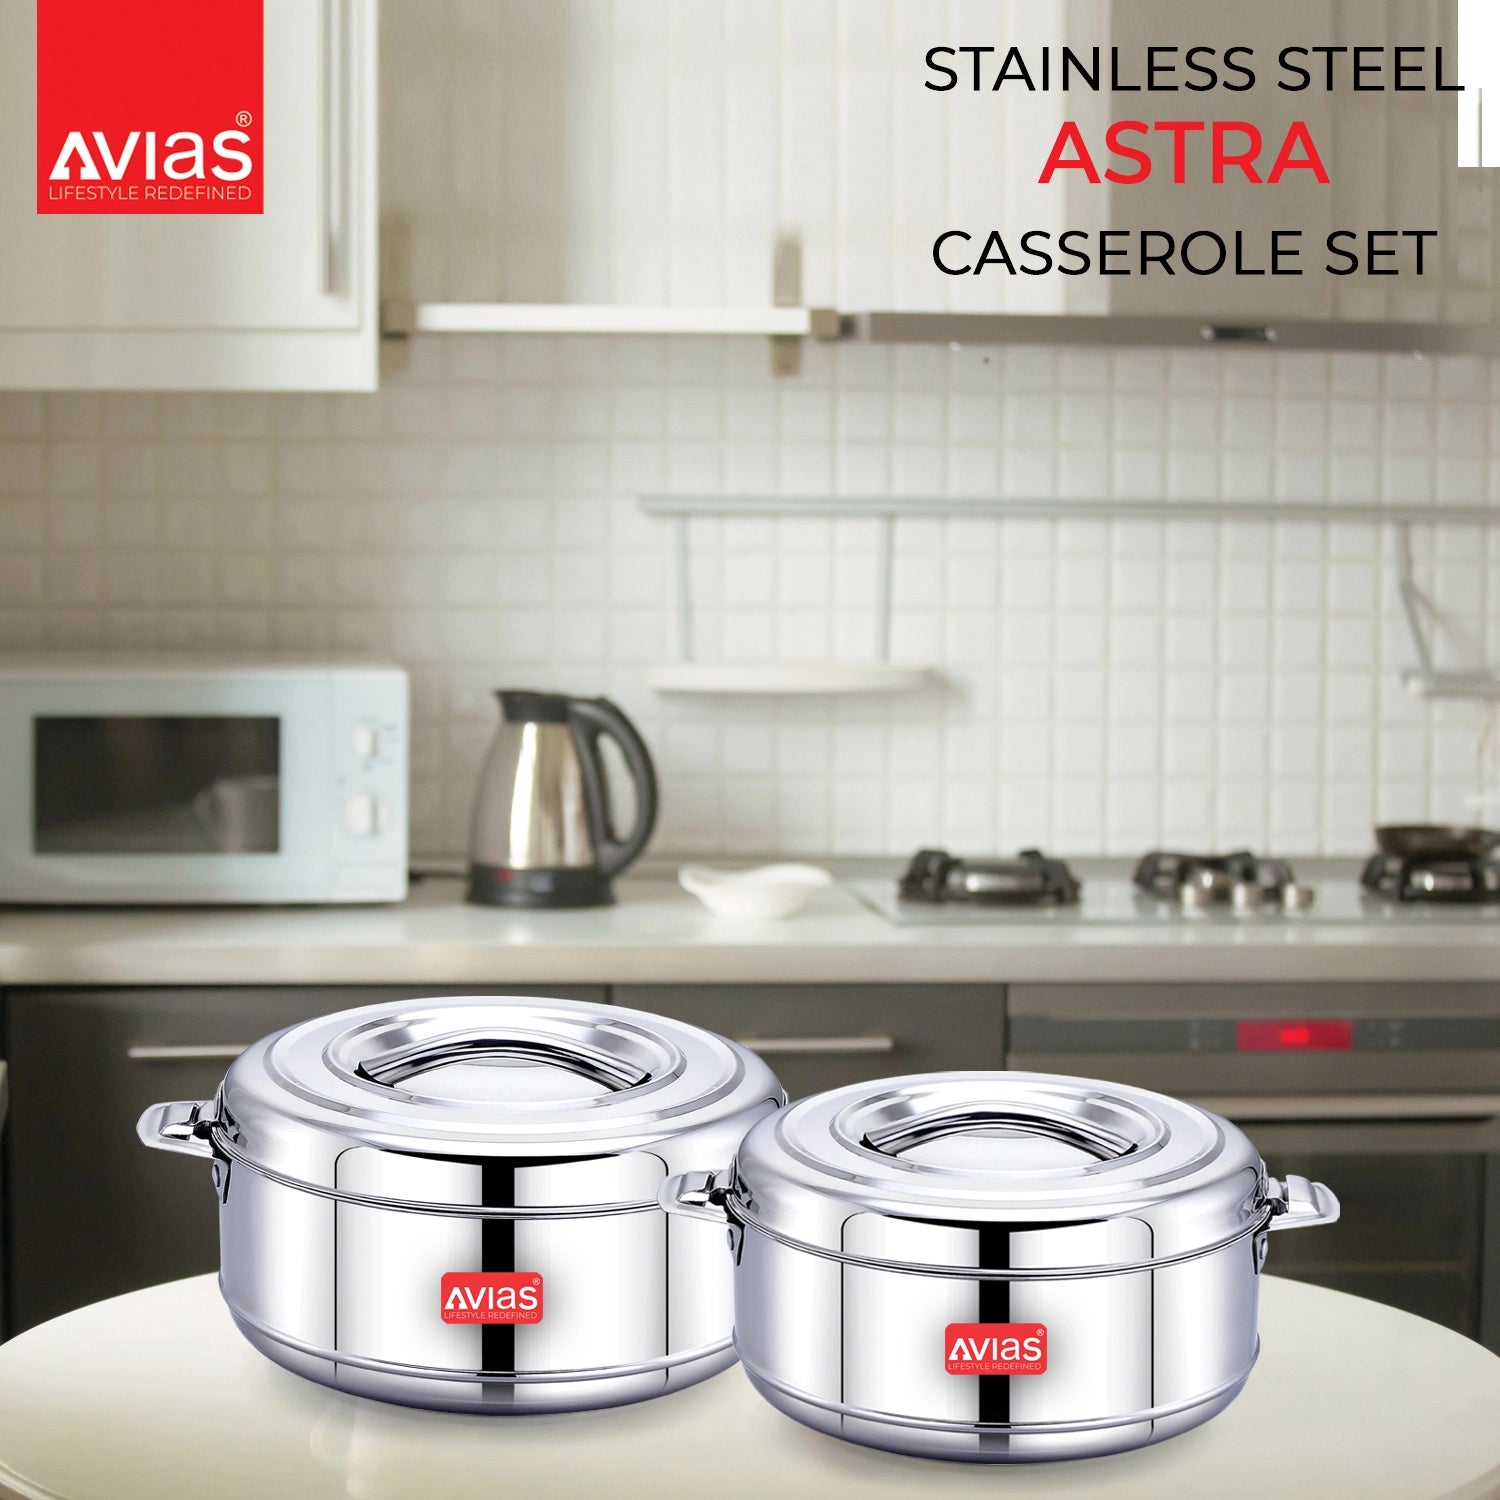 AVIAS Astra Stainless Steel Casserole for storing food